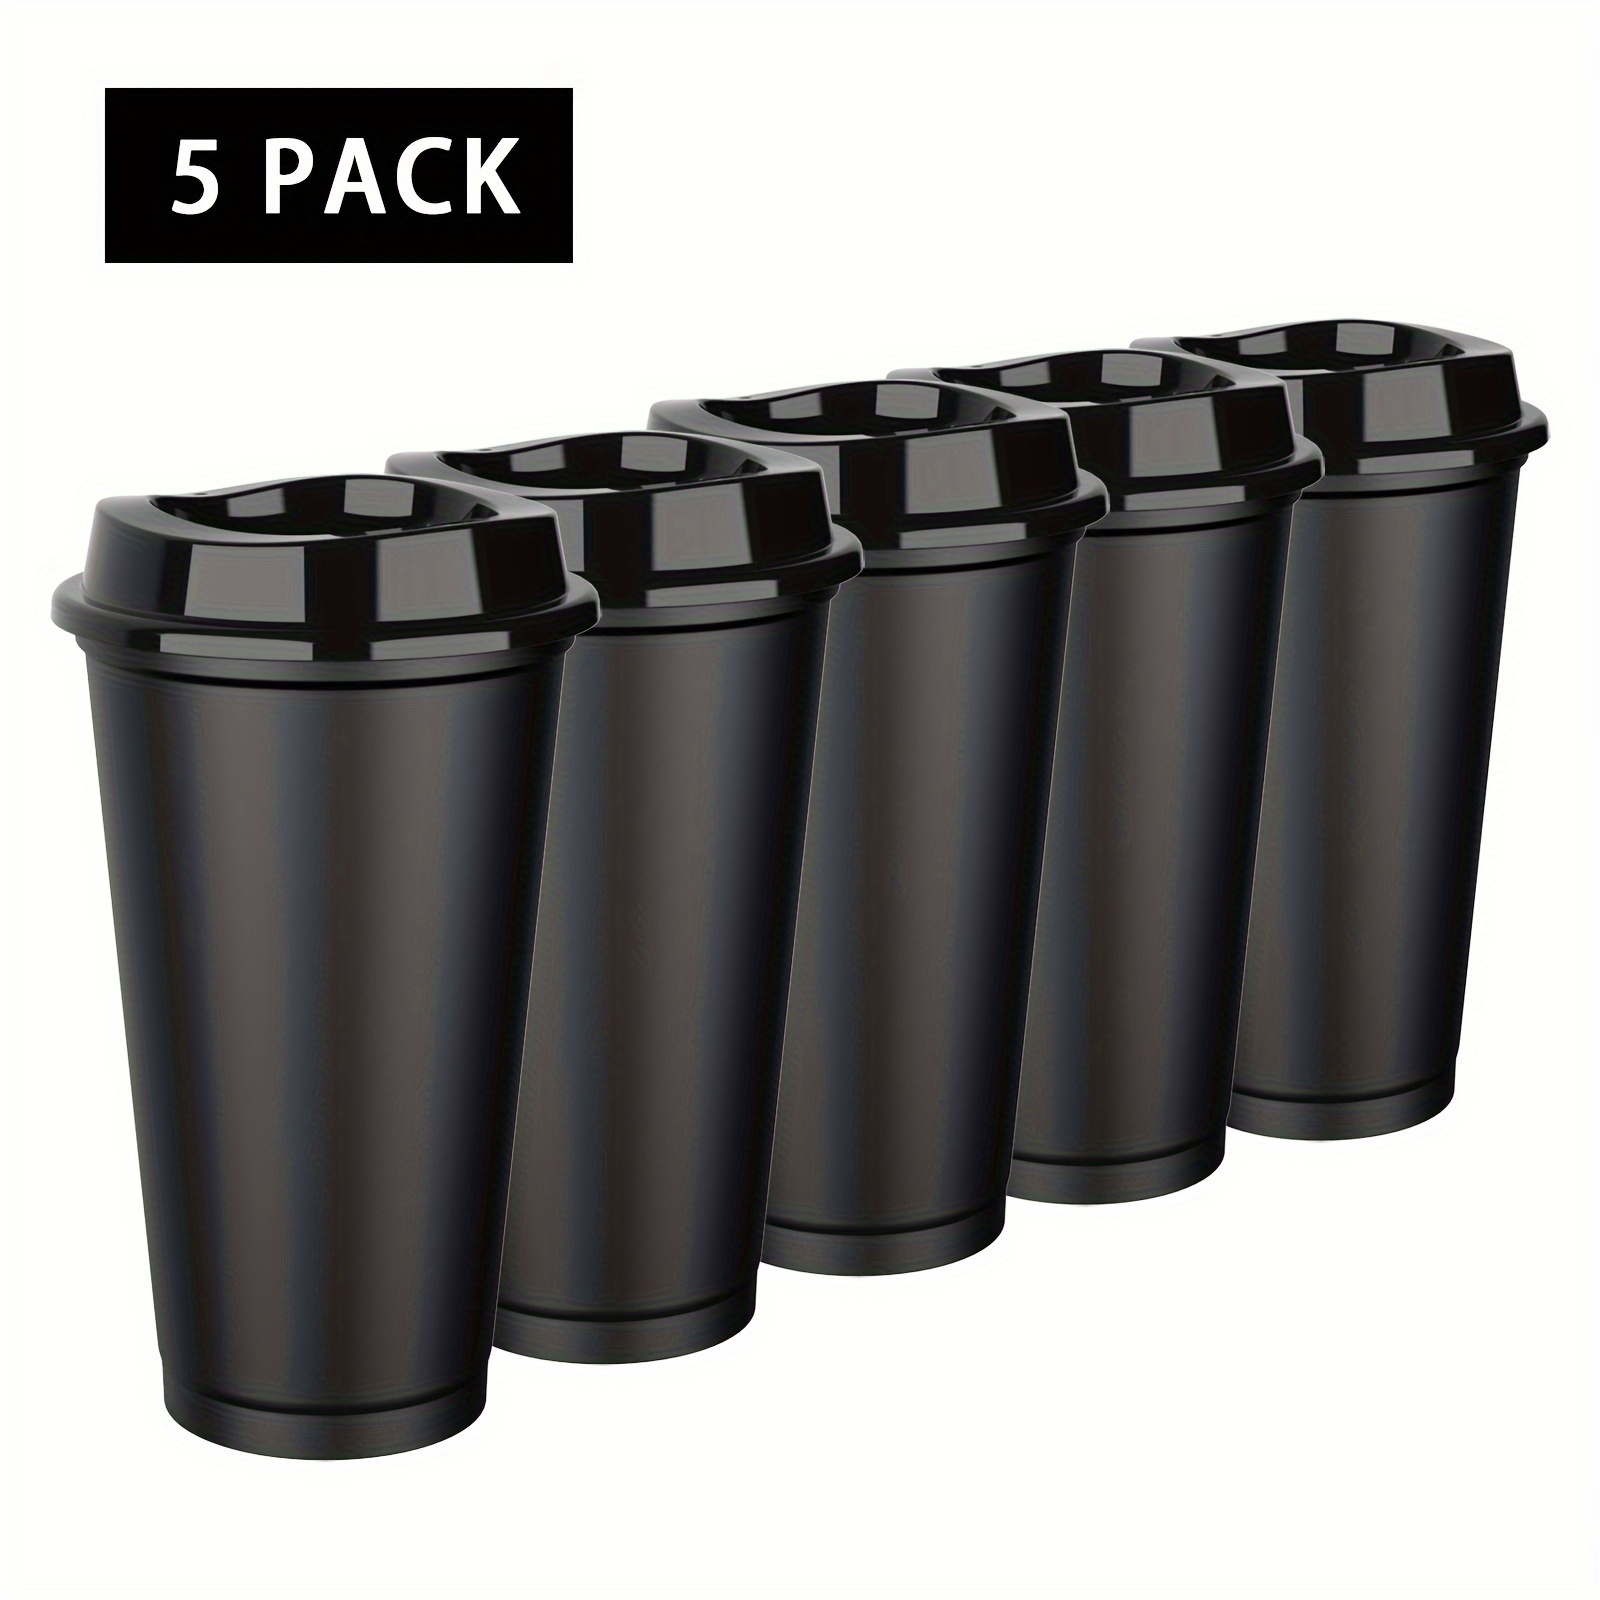 

5pcs 16oz Coffee Cup, Plastic Pp Reusable Travel Mug, Hot Water Mugs With Lids, 473ml Bpa Free Travel Coffee Mugs, Outdoor Cup For Juice, Soda, Coffee